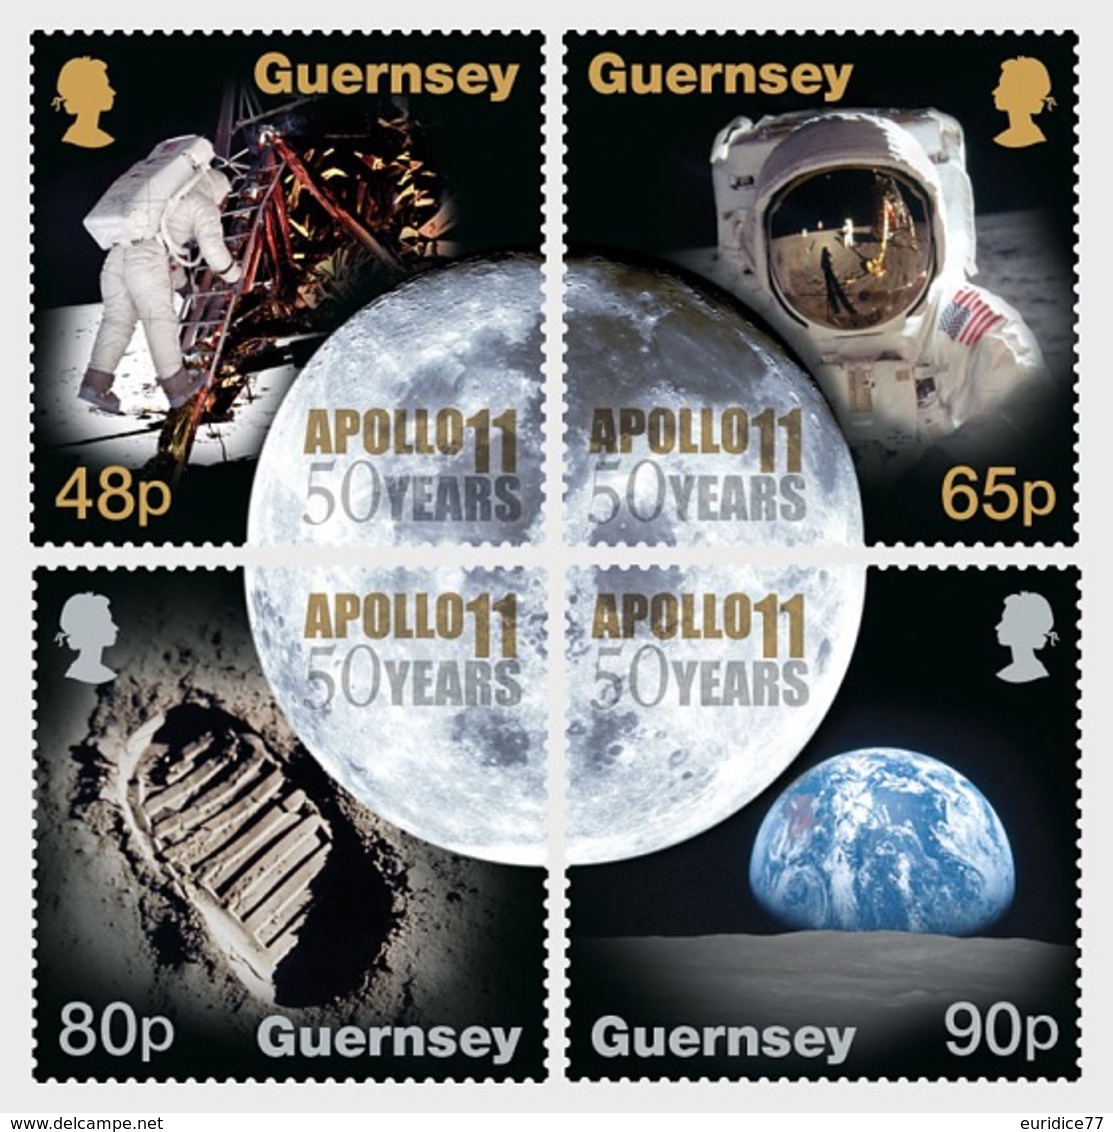 Guernsey 2019 - 50th Anniversary Of The Moon Landings Stamp Set Mnh - Guernsey